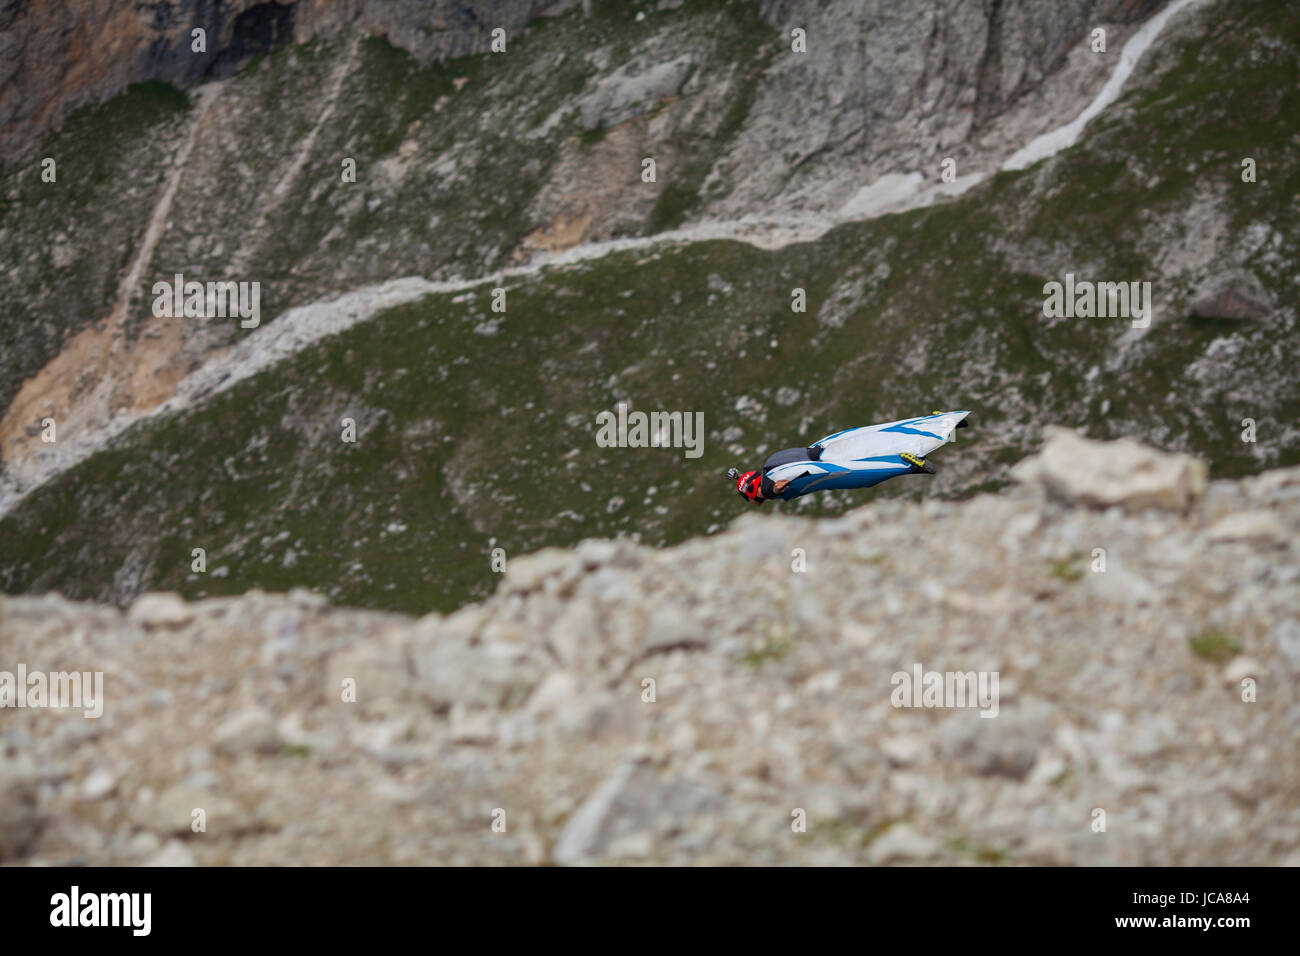 Wingsuit pilot Hartman Rector soars by in the Dolomites. Italy. Stock Photo